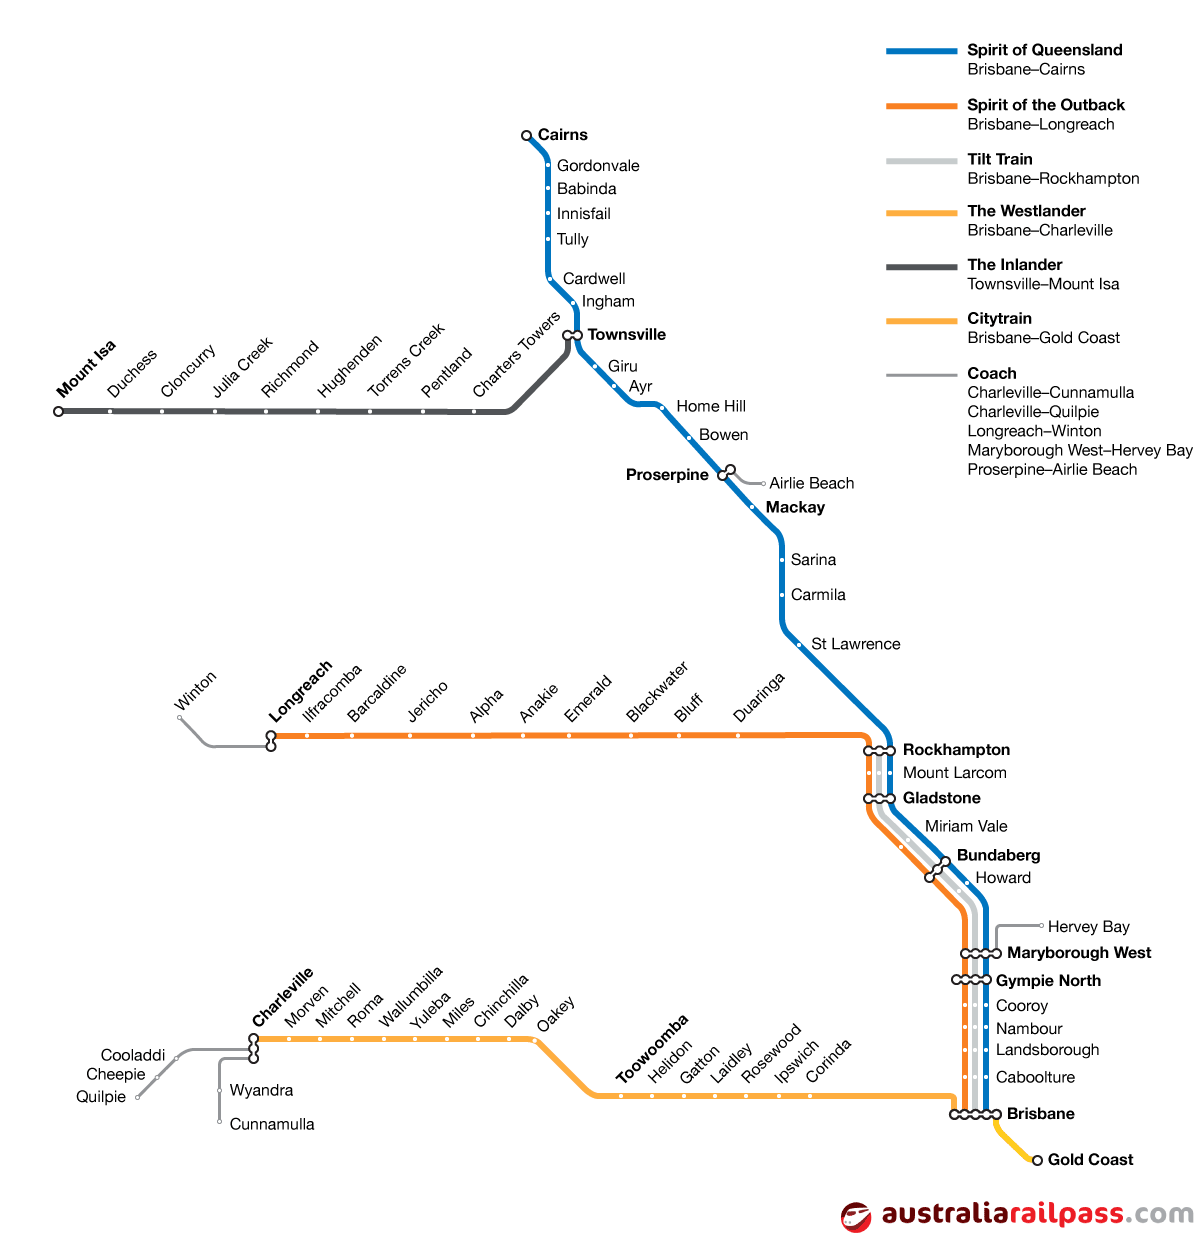 Map of rail lines covered by the Queensland Explorer Pass rail pass